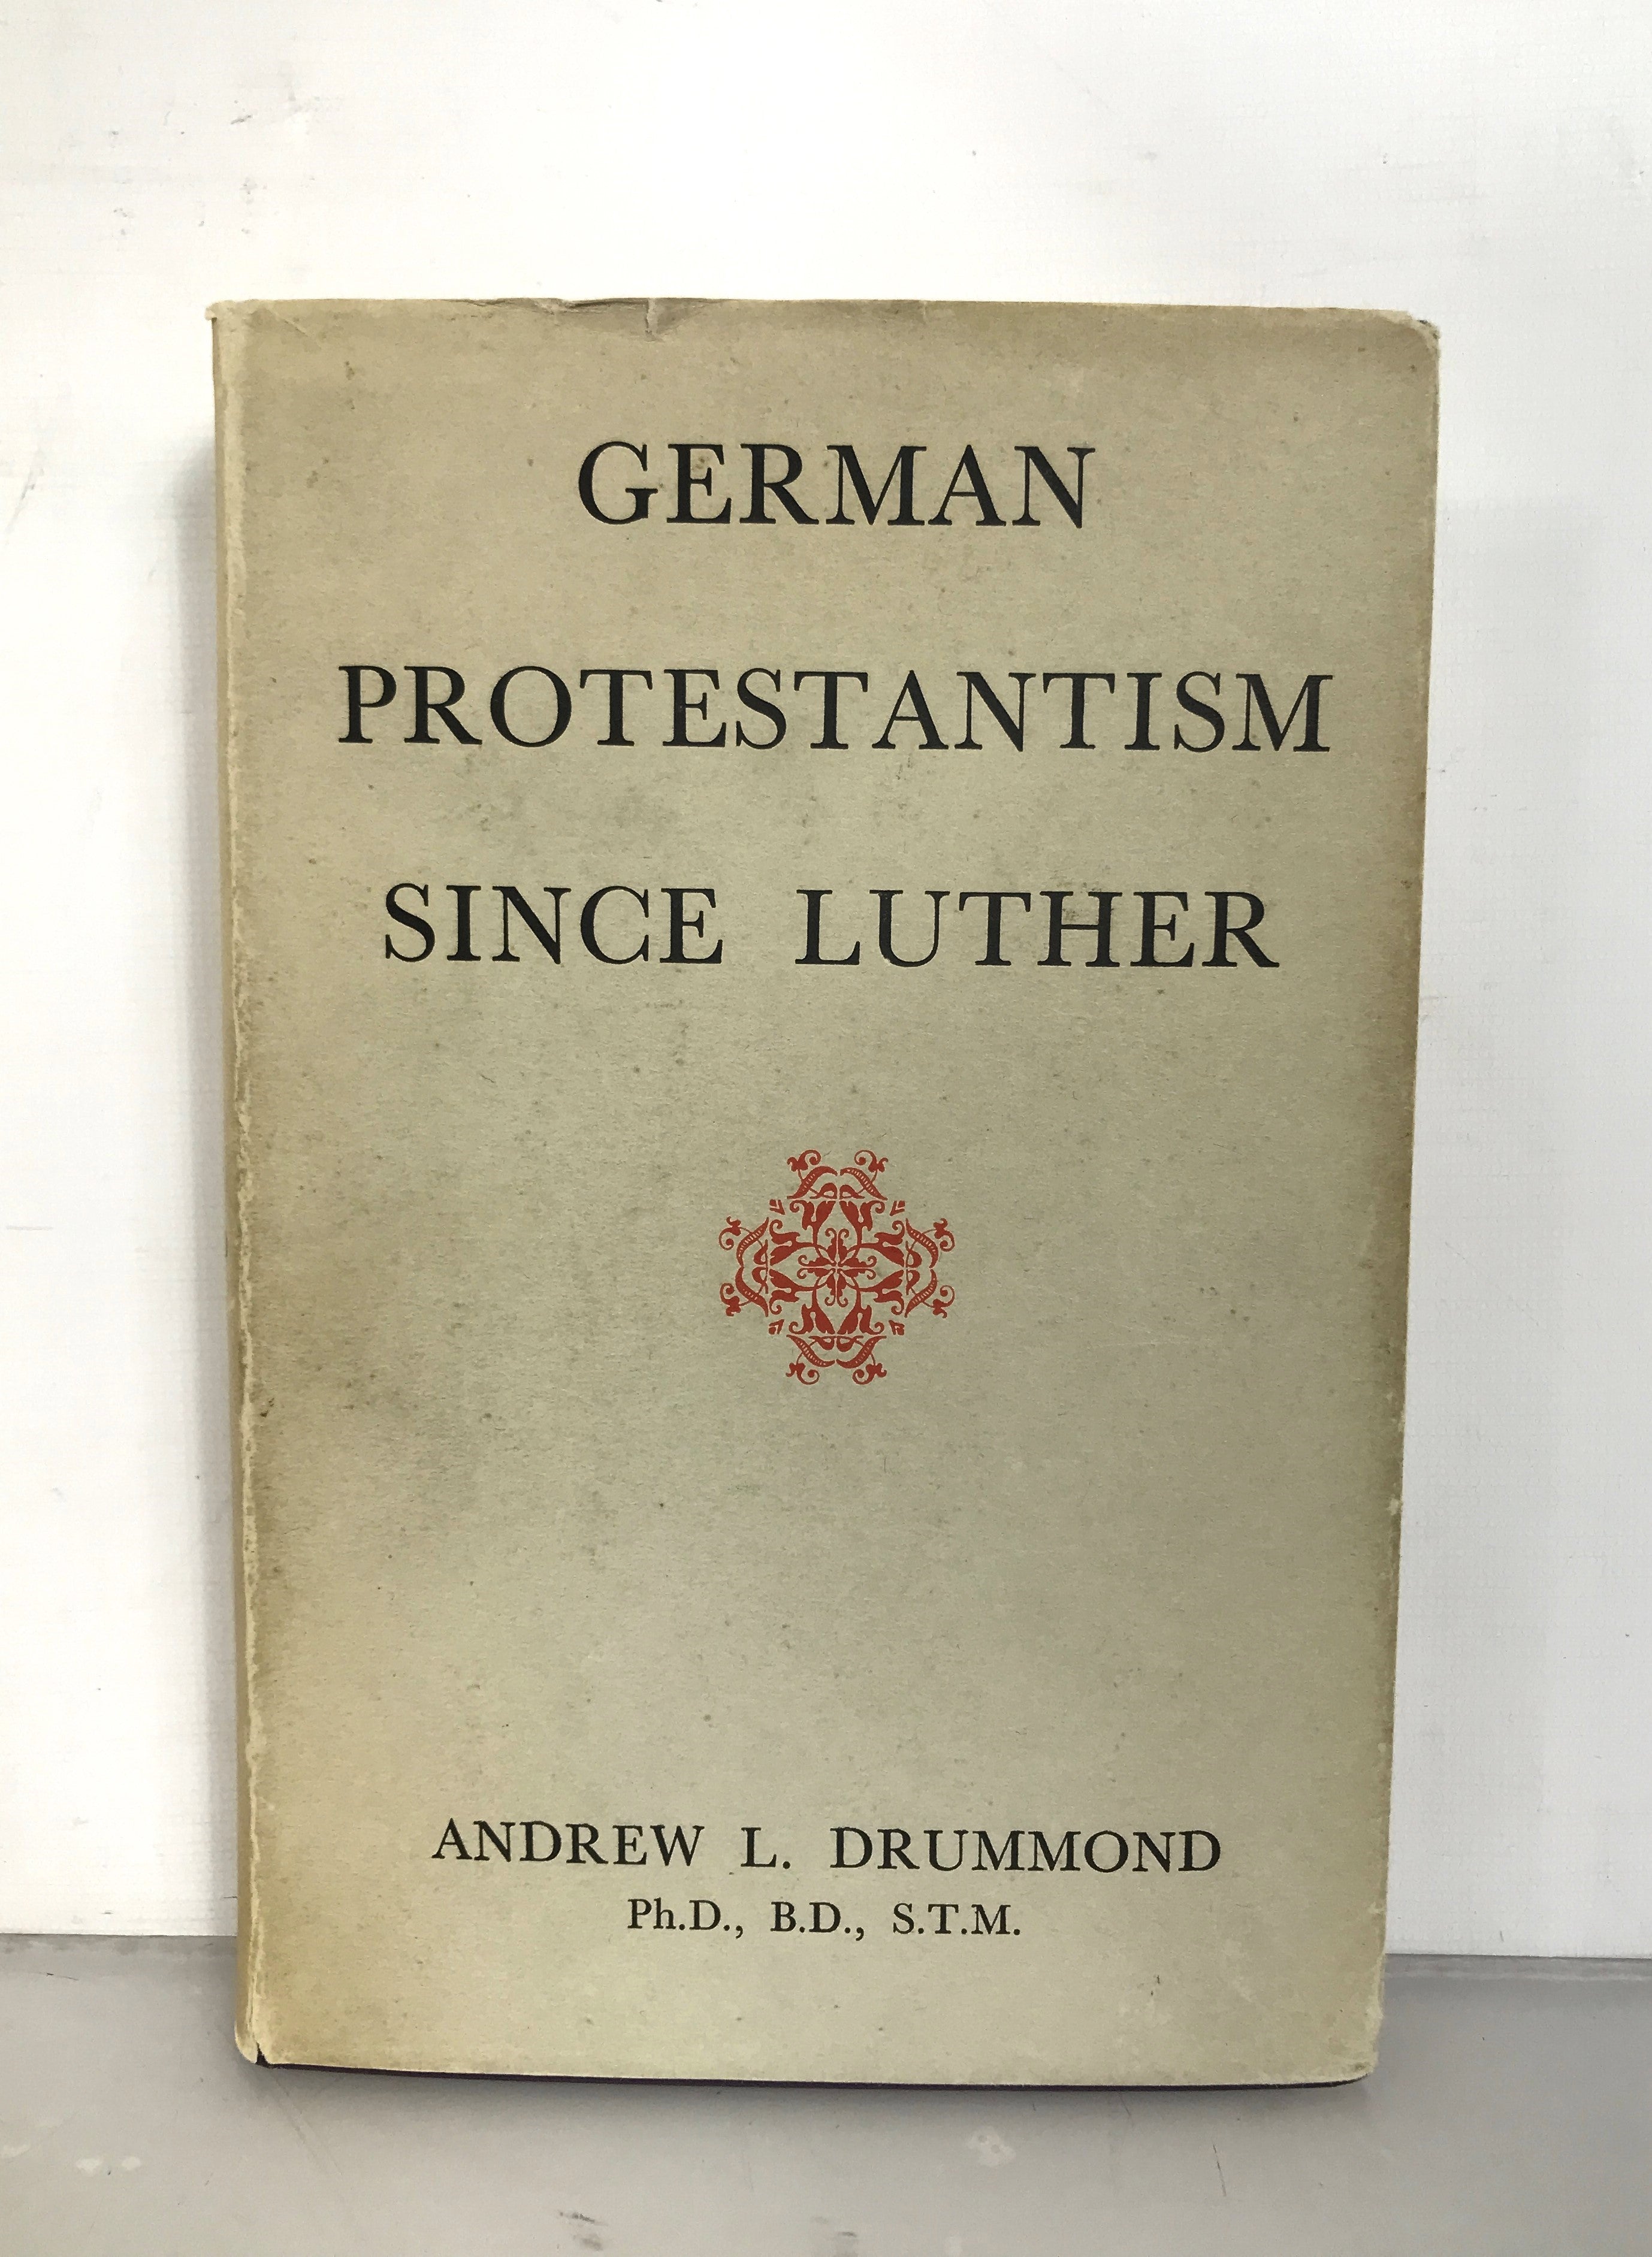 German Protestantism Since Luther by Andrew Drummond 1951 HC DJ